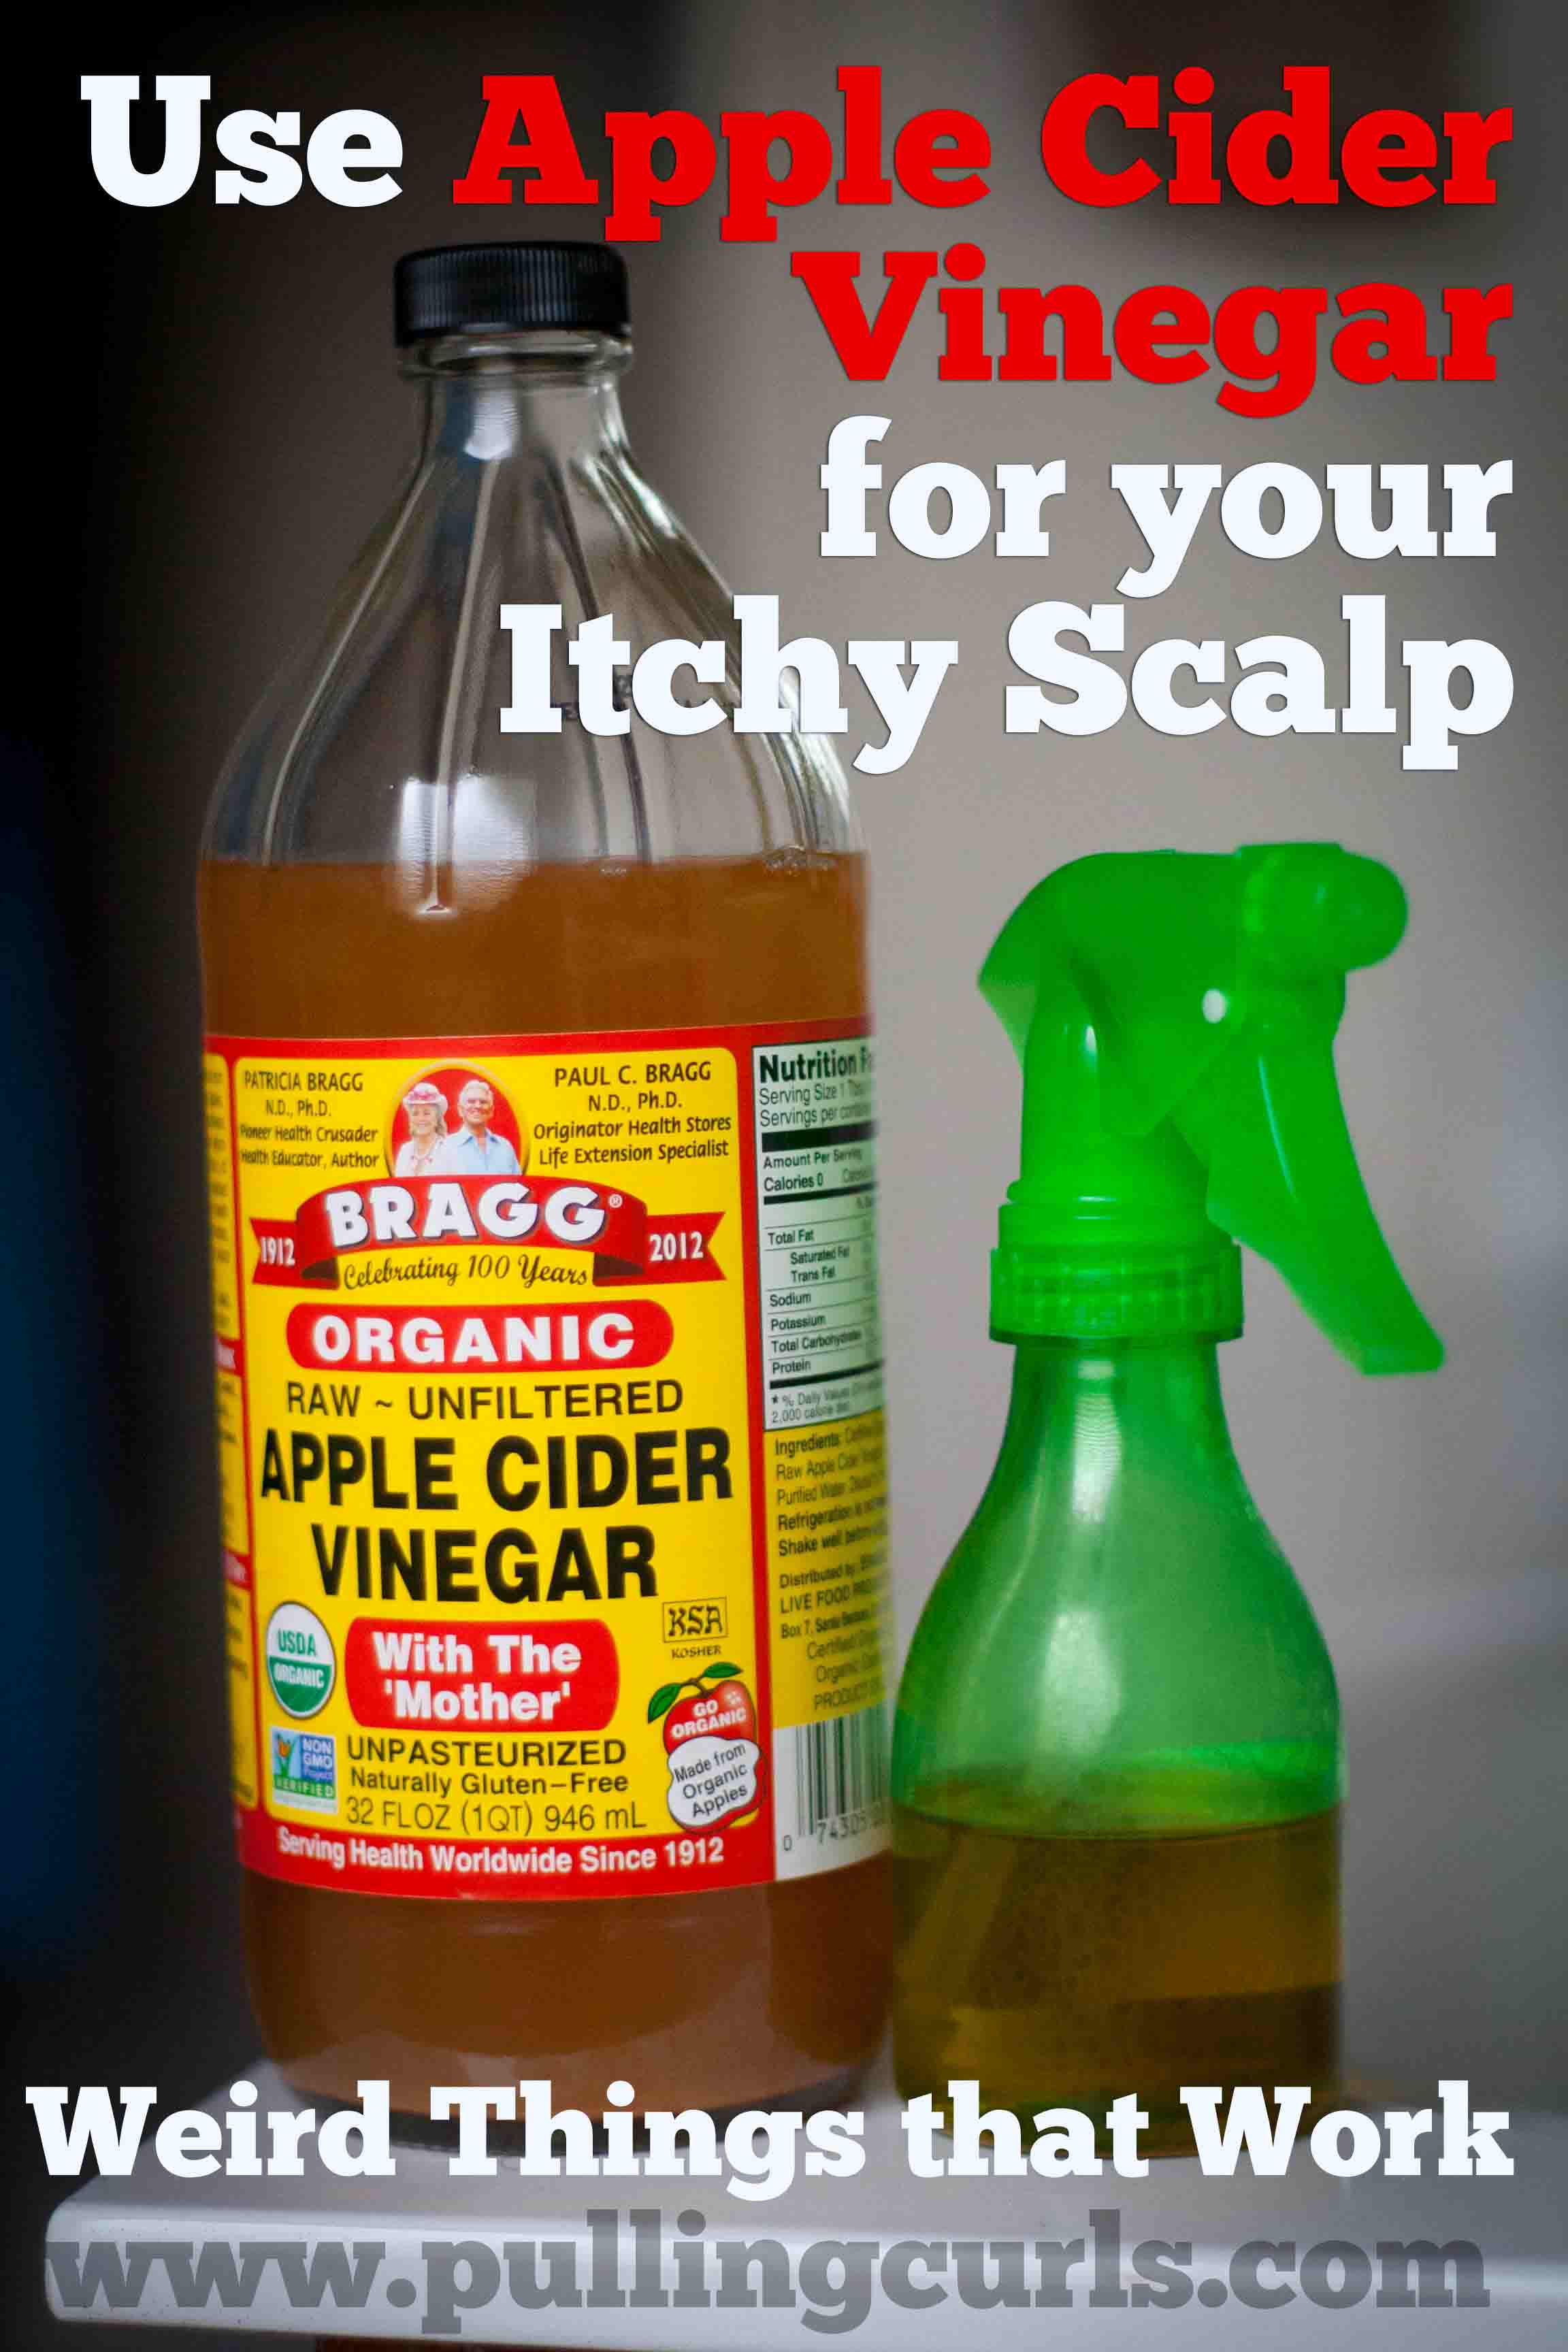 Apple Cider Vinegar for Itchy Scalp: Also includes Essential Oils & More